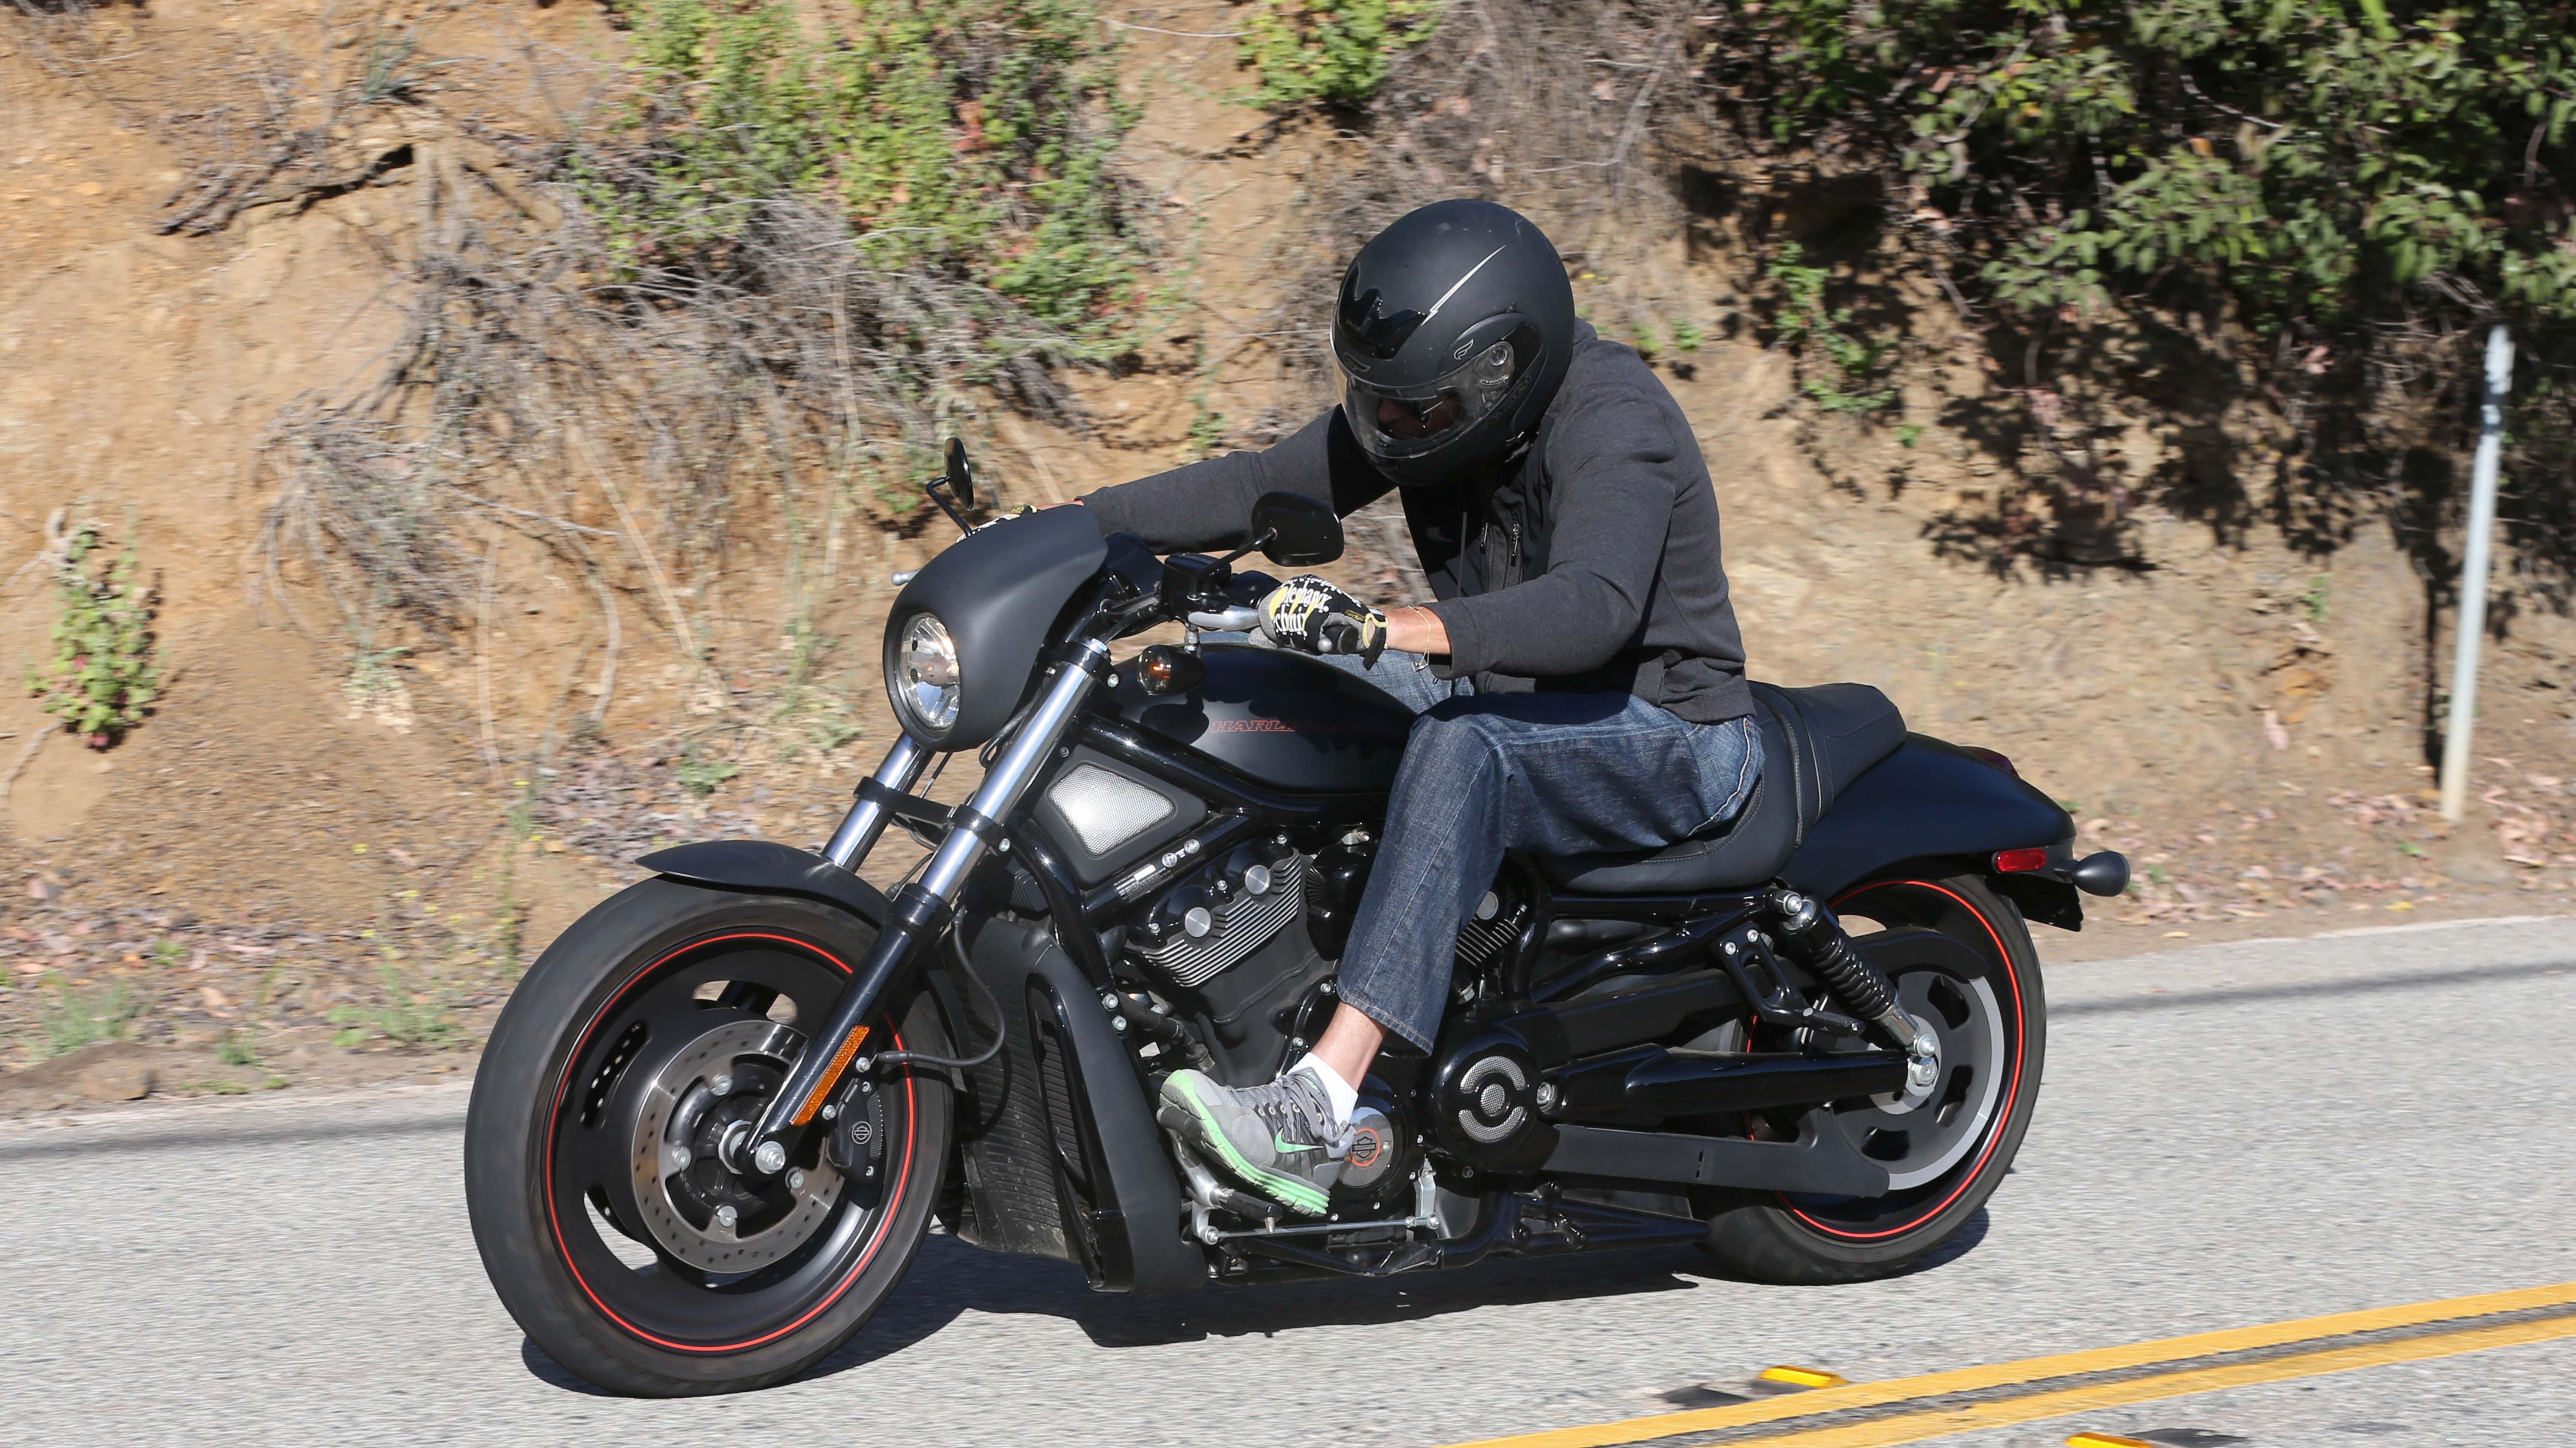 EXCLUSIVE: ** PREMIUM RATES APPLY** Bruce Jenner goes for a late afternoon spin on his motorcycle.